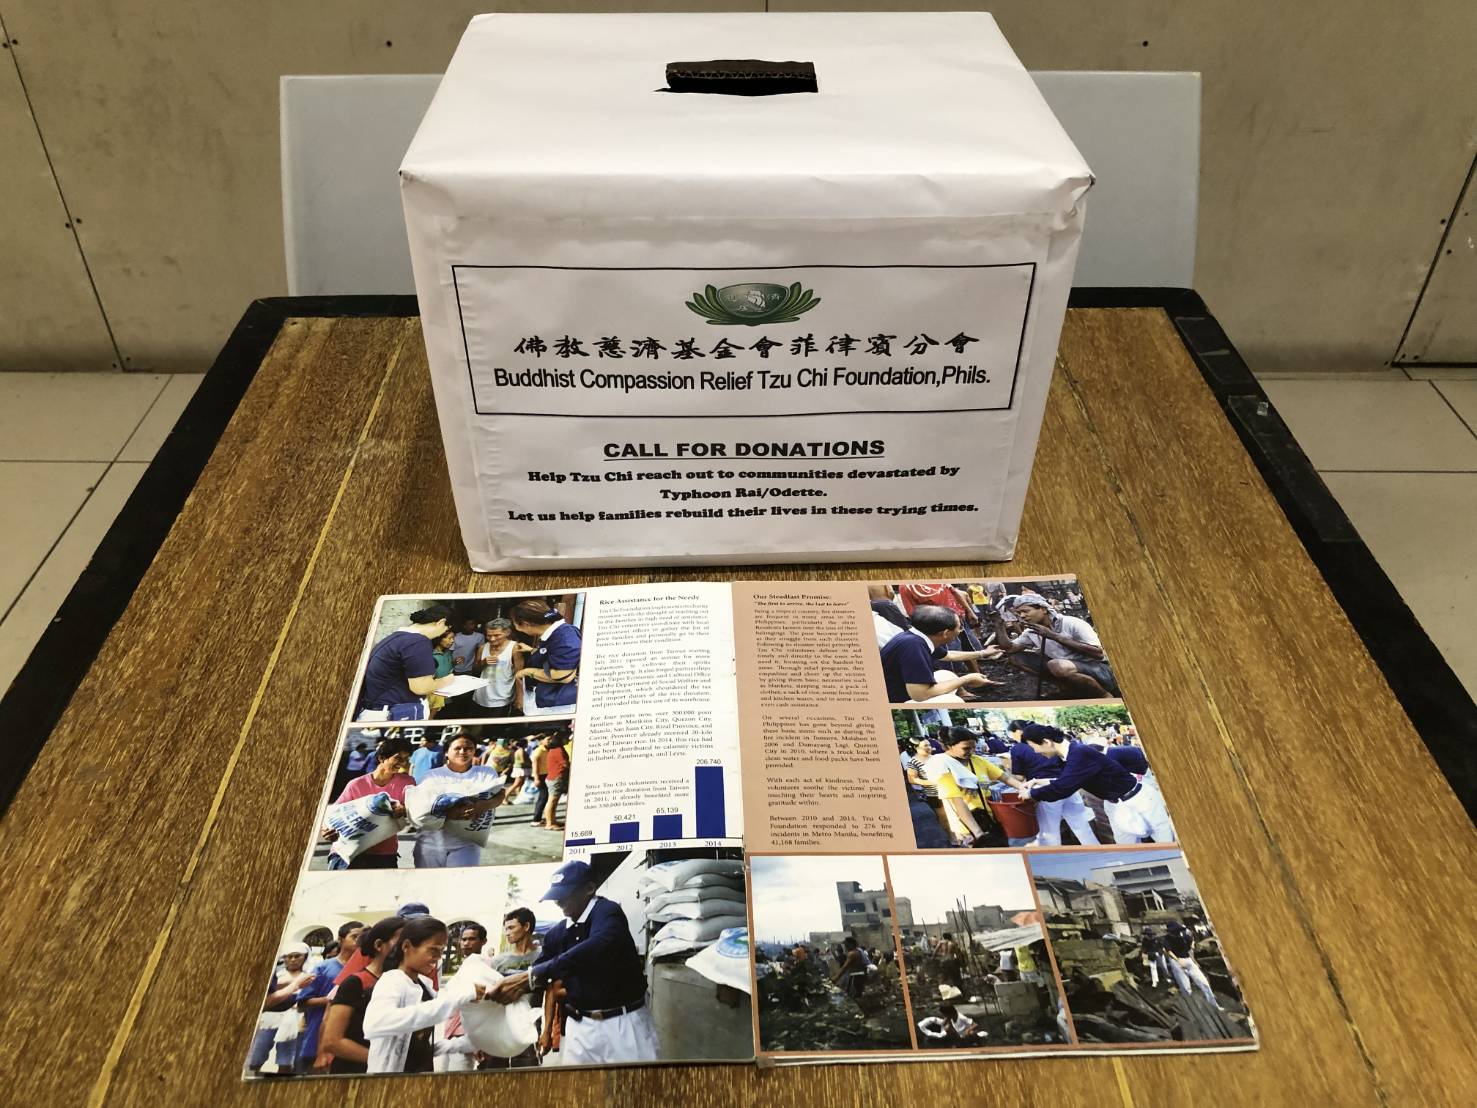 Pledges in any amount are placed inside donation boxes like this. A Tzu Chi pamphlet with pictures of various relief efforts undertaken through the years by the foundation shows donors exactly where their financial help goes.  